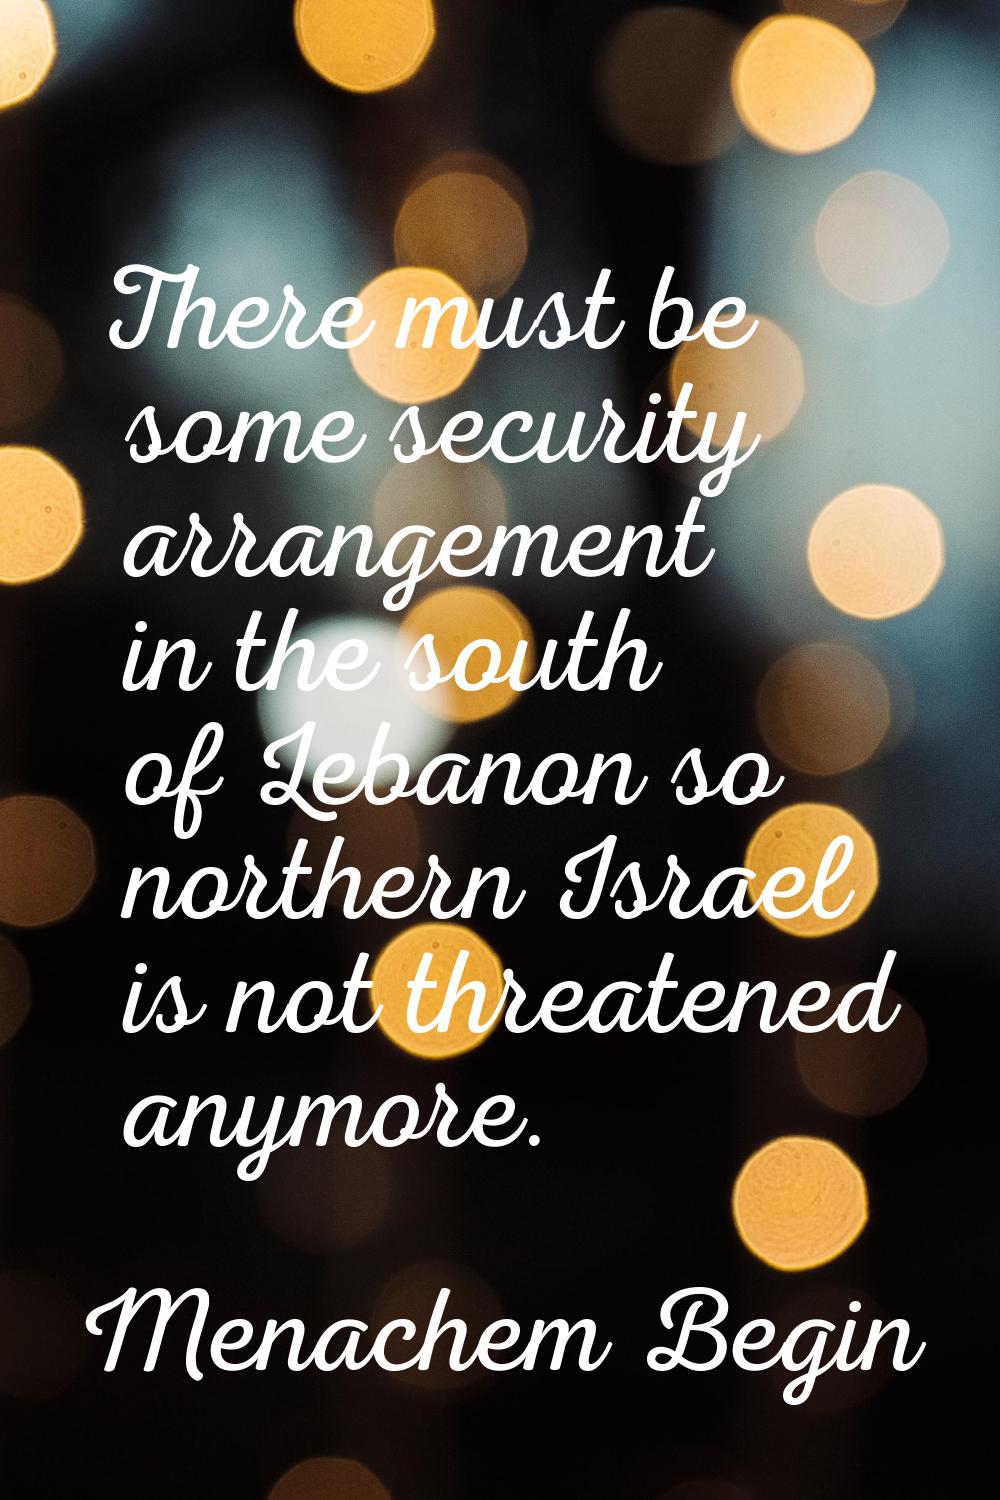 There must be some security arrangement in the south of Lebanon so northern Israel is not threatene